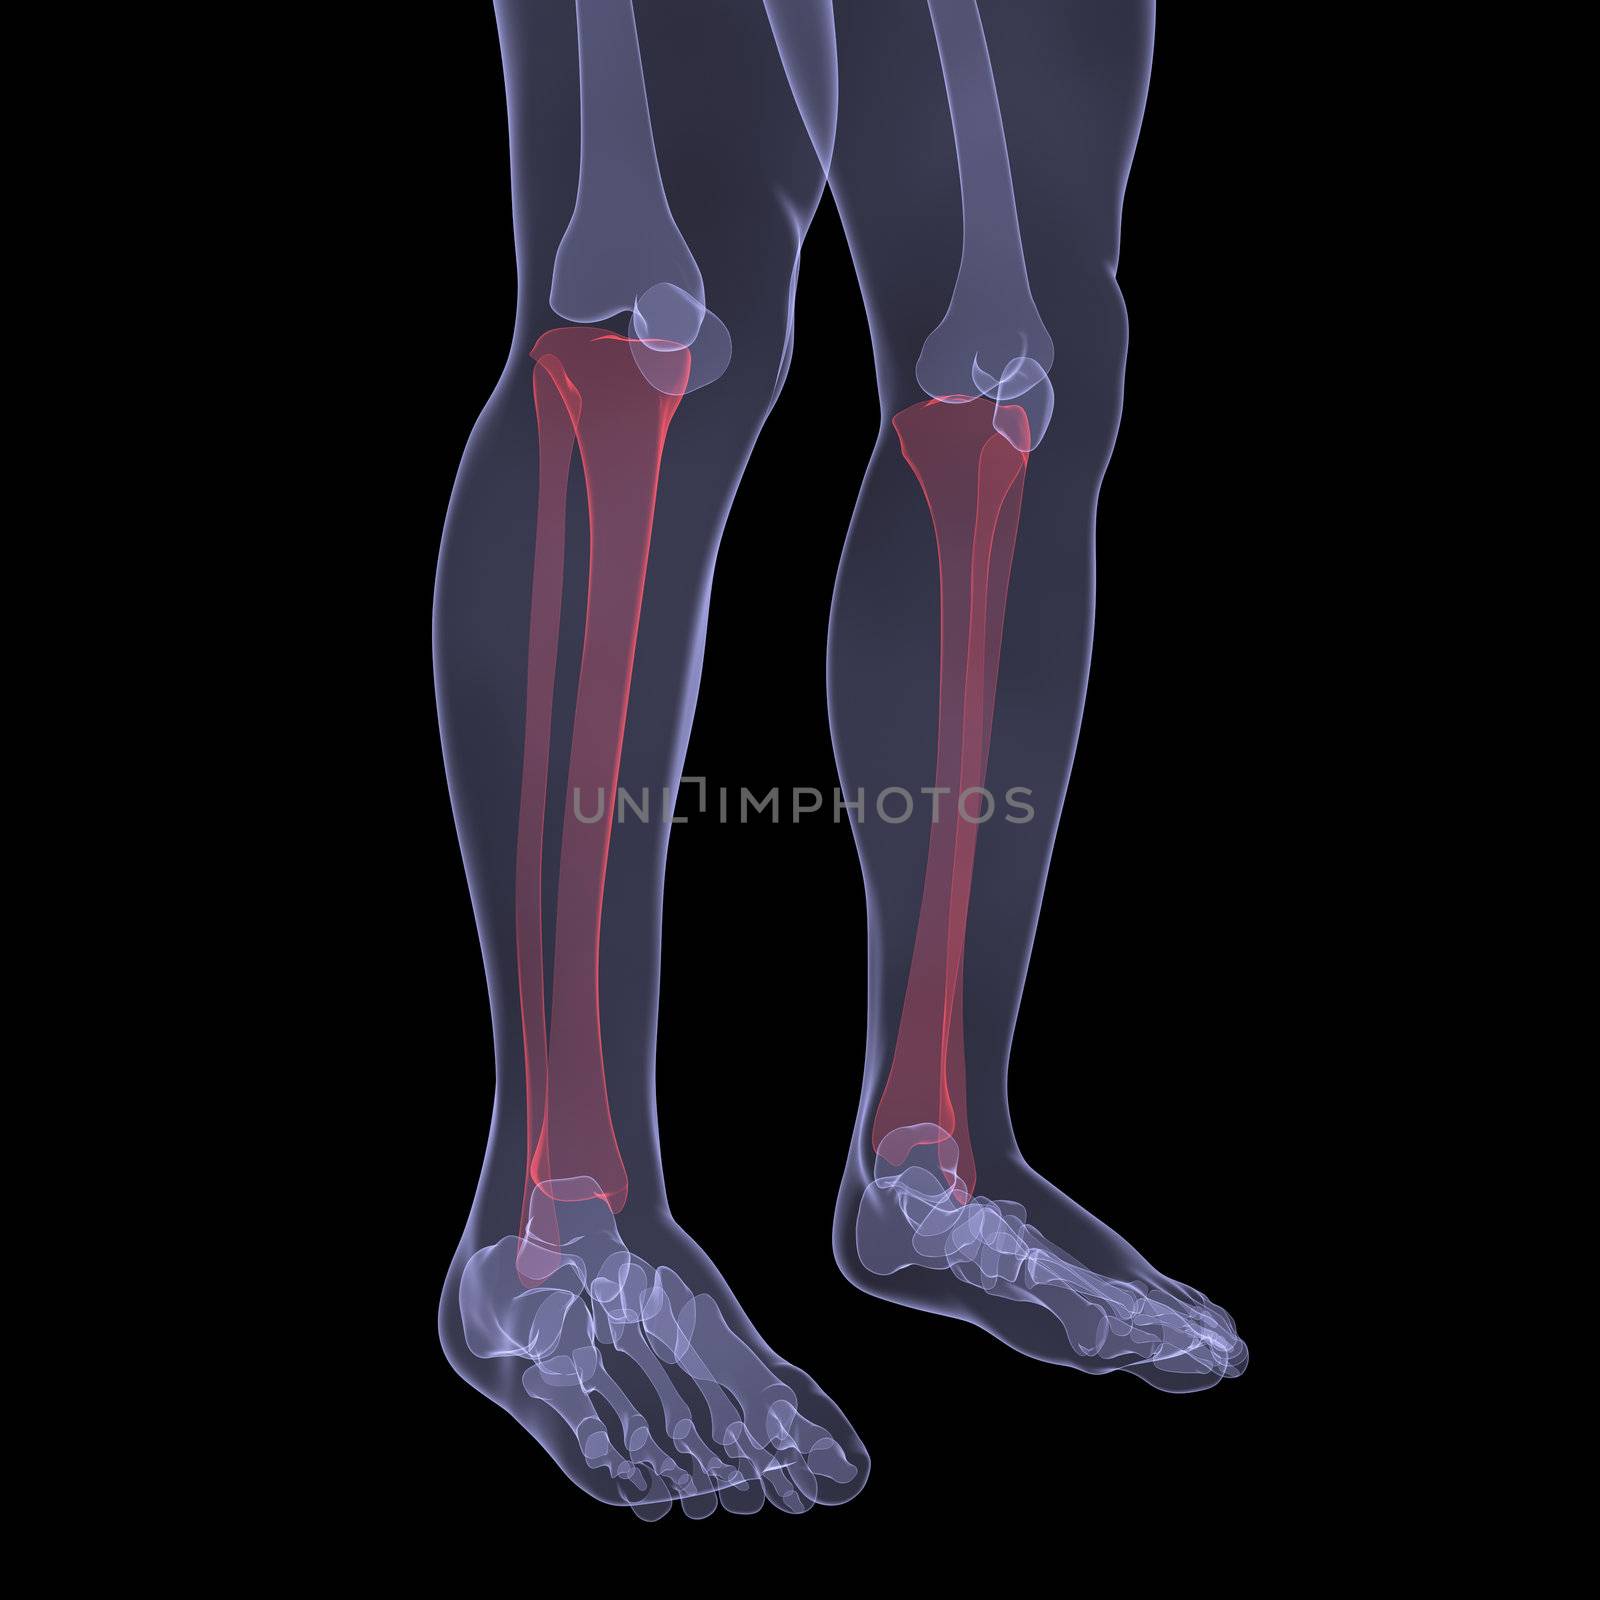 X-ray of human legs. Render on a black background